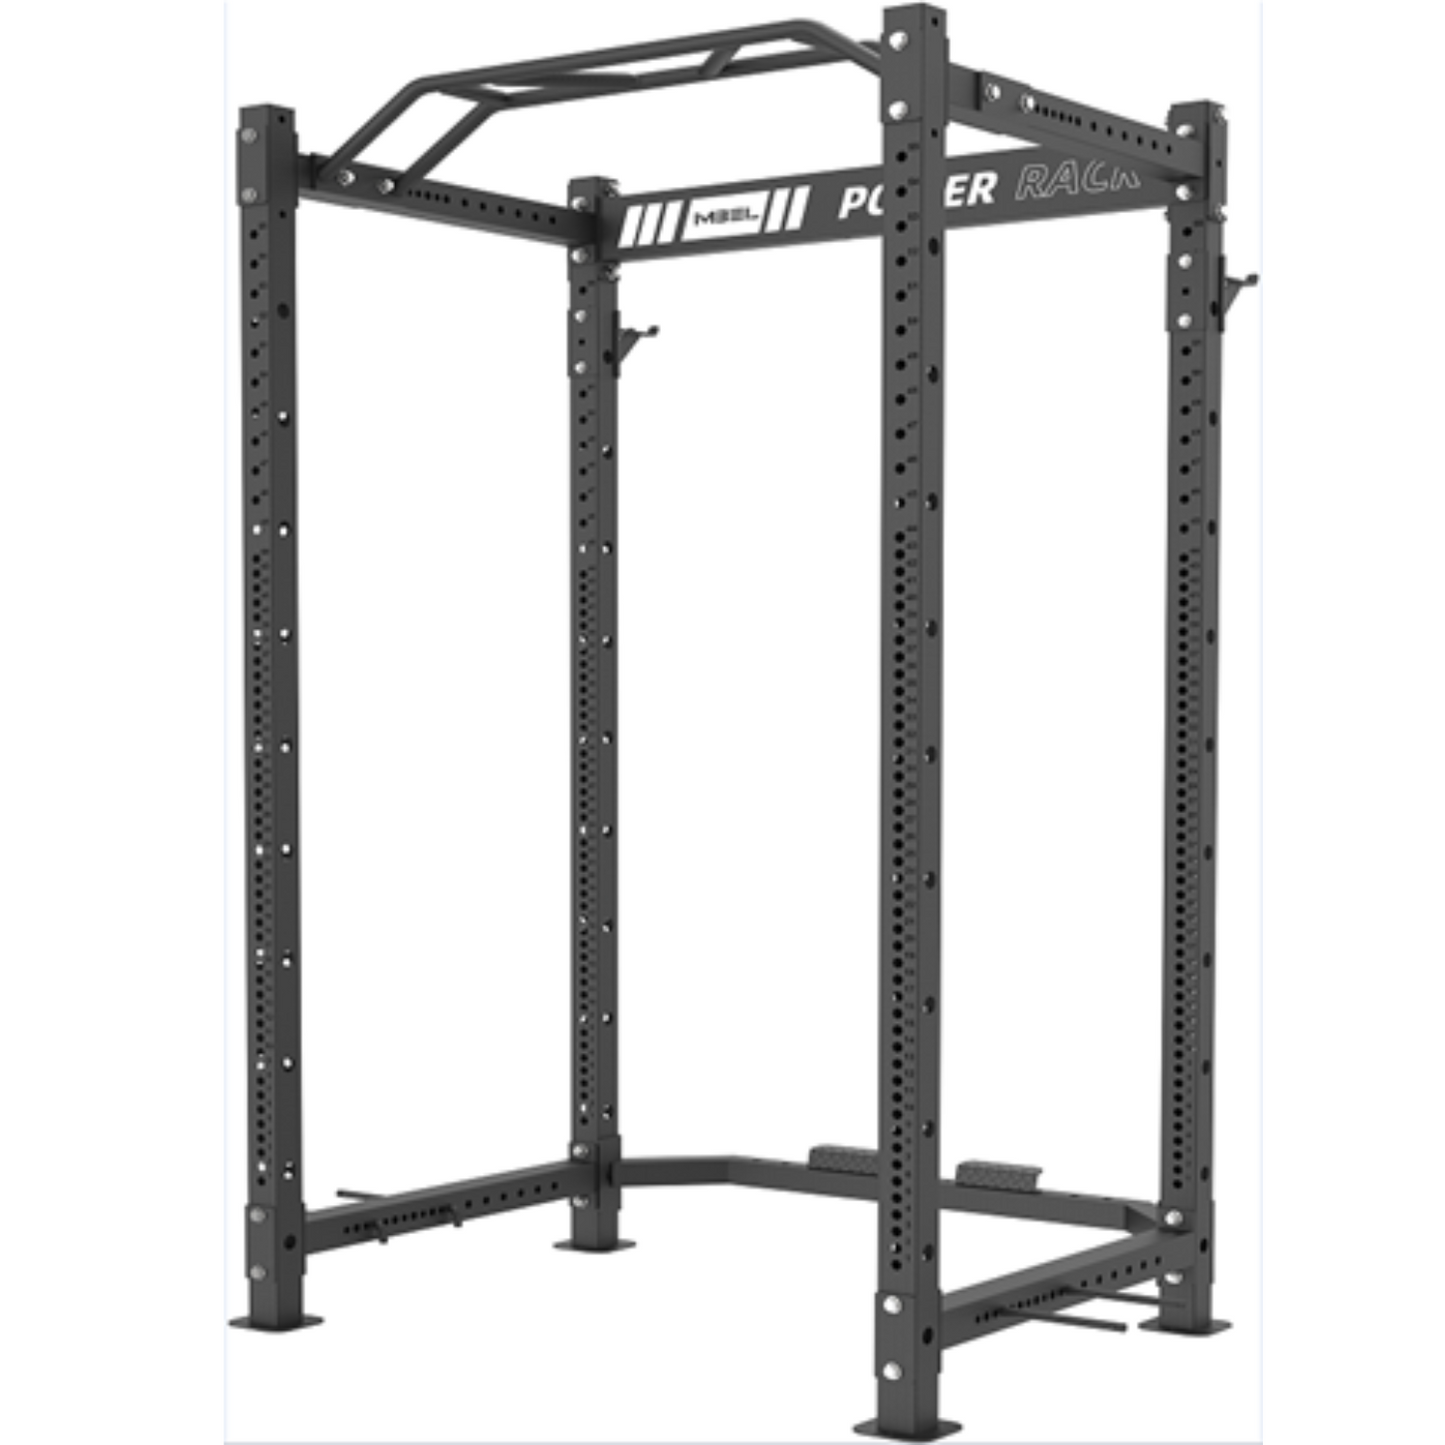 Muscle Motion PR1012 Power Rack inc Spotter Arms, Safety Rails and High Low Pulley